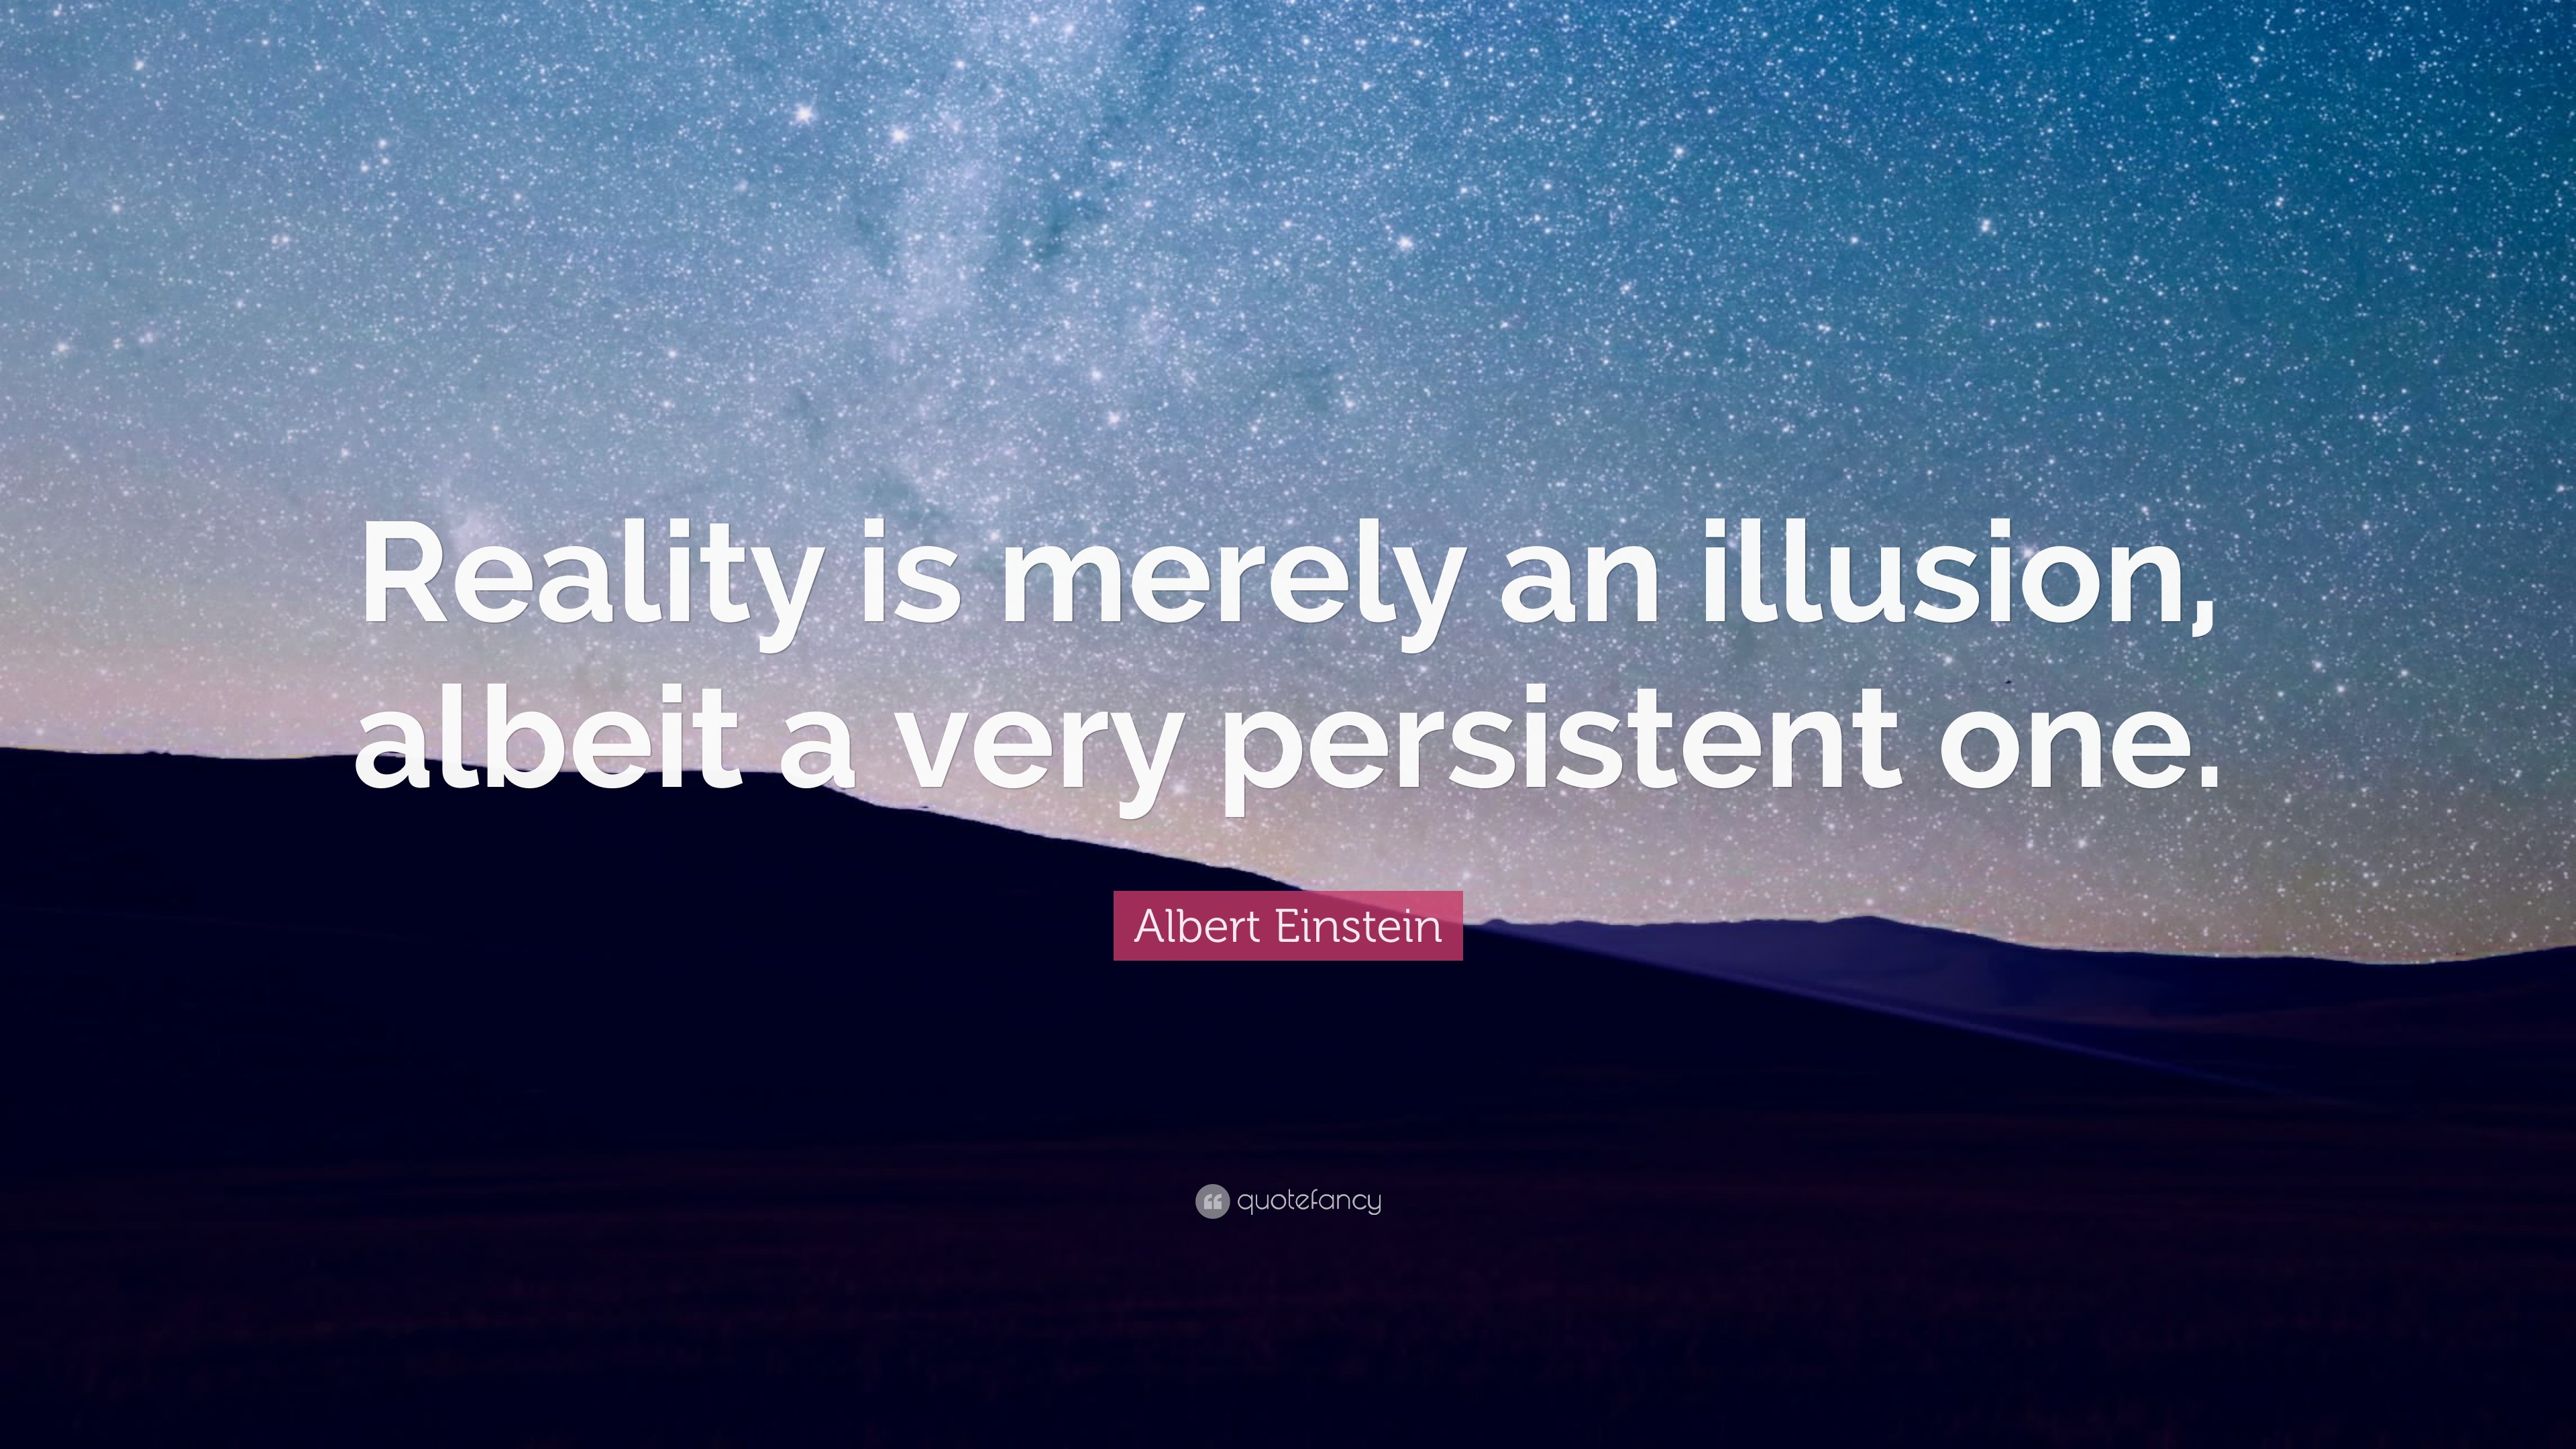 Albert Einstein Quote: “Reality is merely an illusion, albeit a very